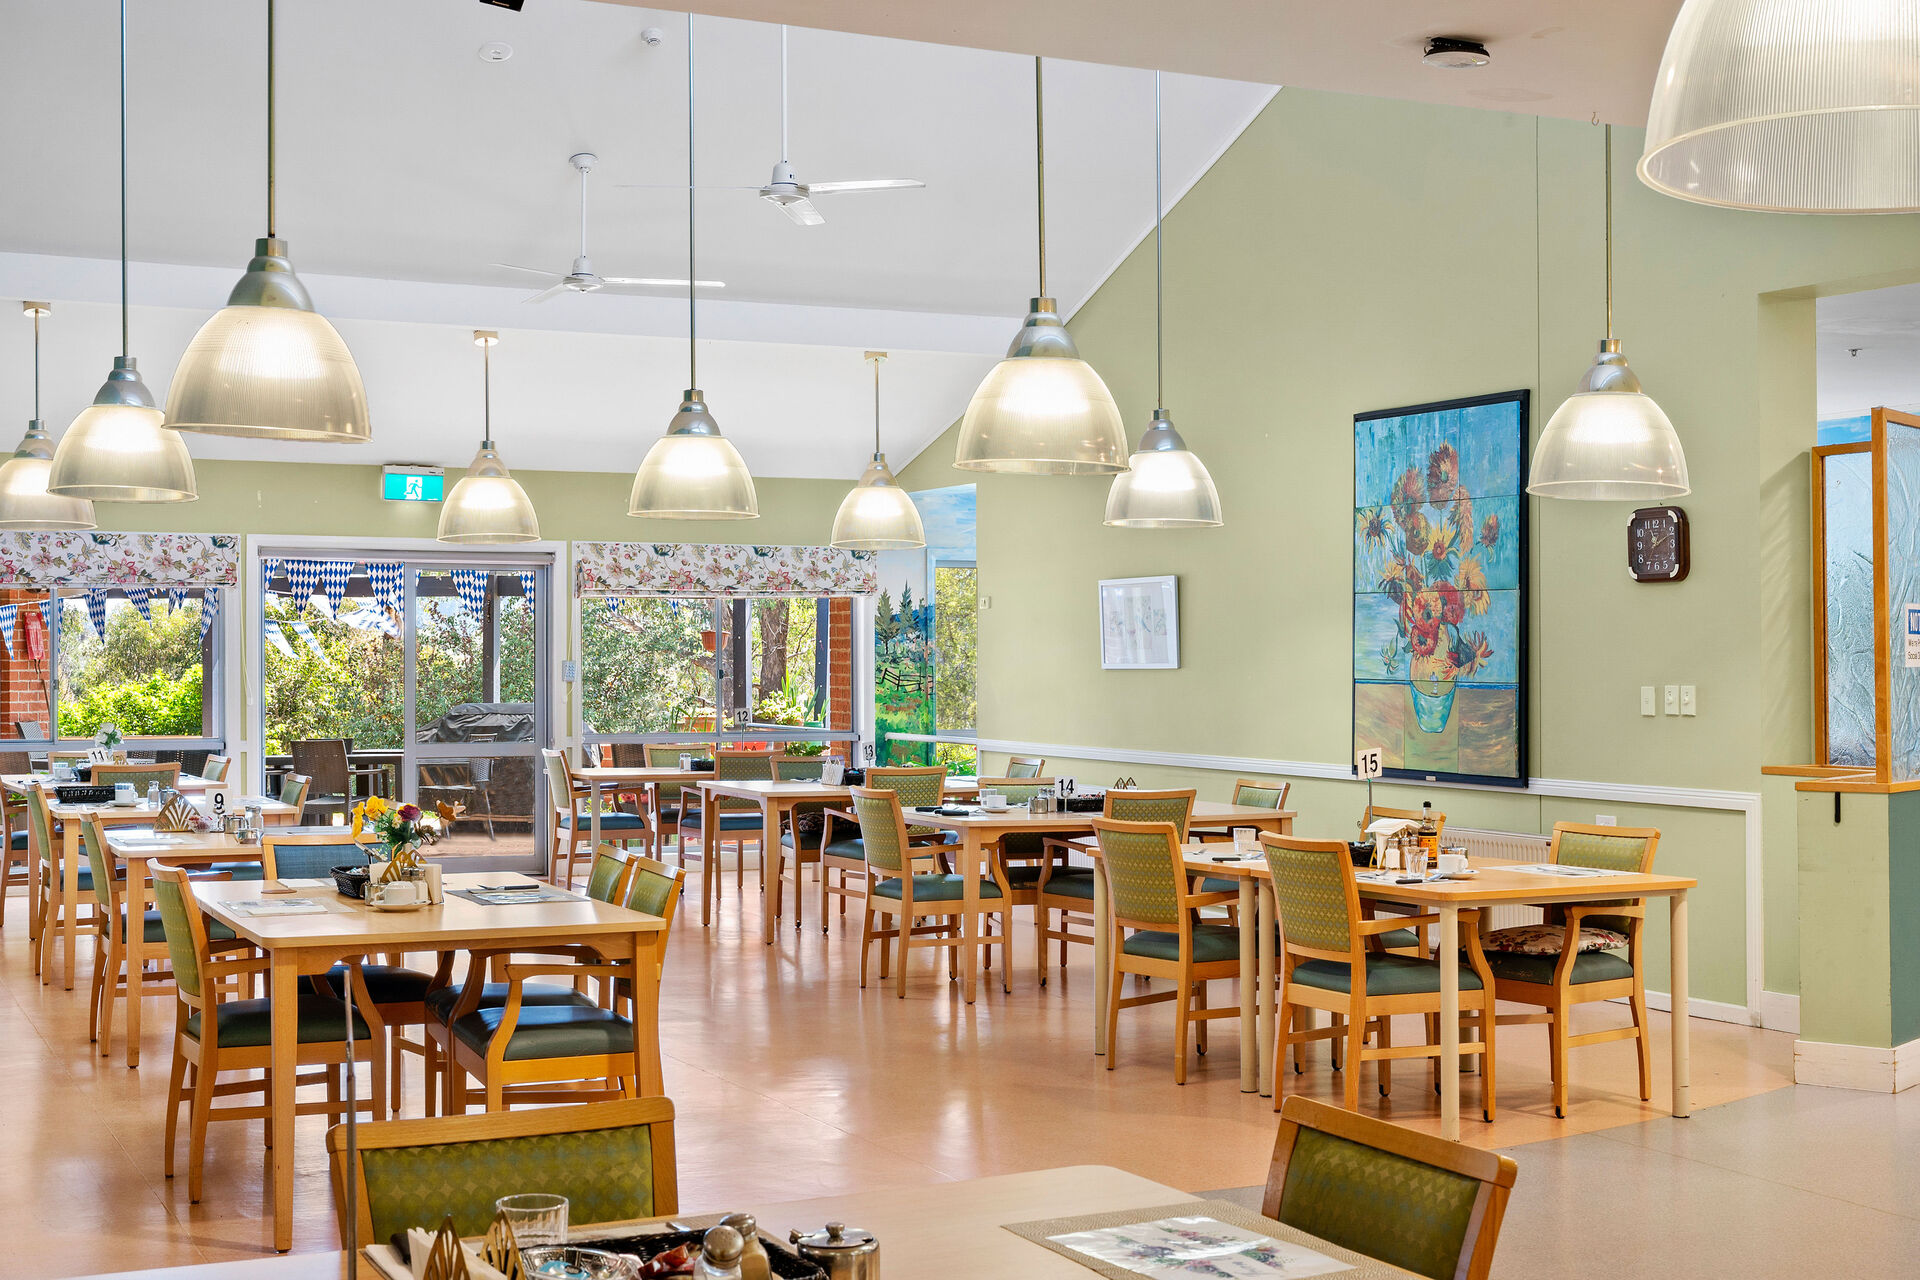 large communal dining room serving fresh meals to the aged care residents of the george forbes aged care home in Queanbeyan nsw